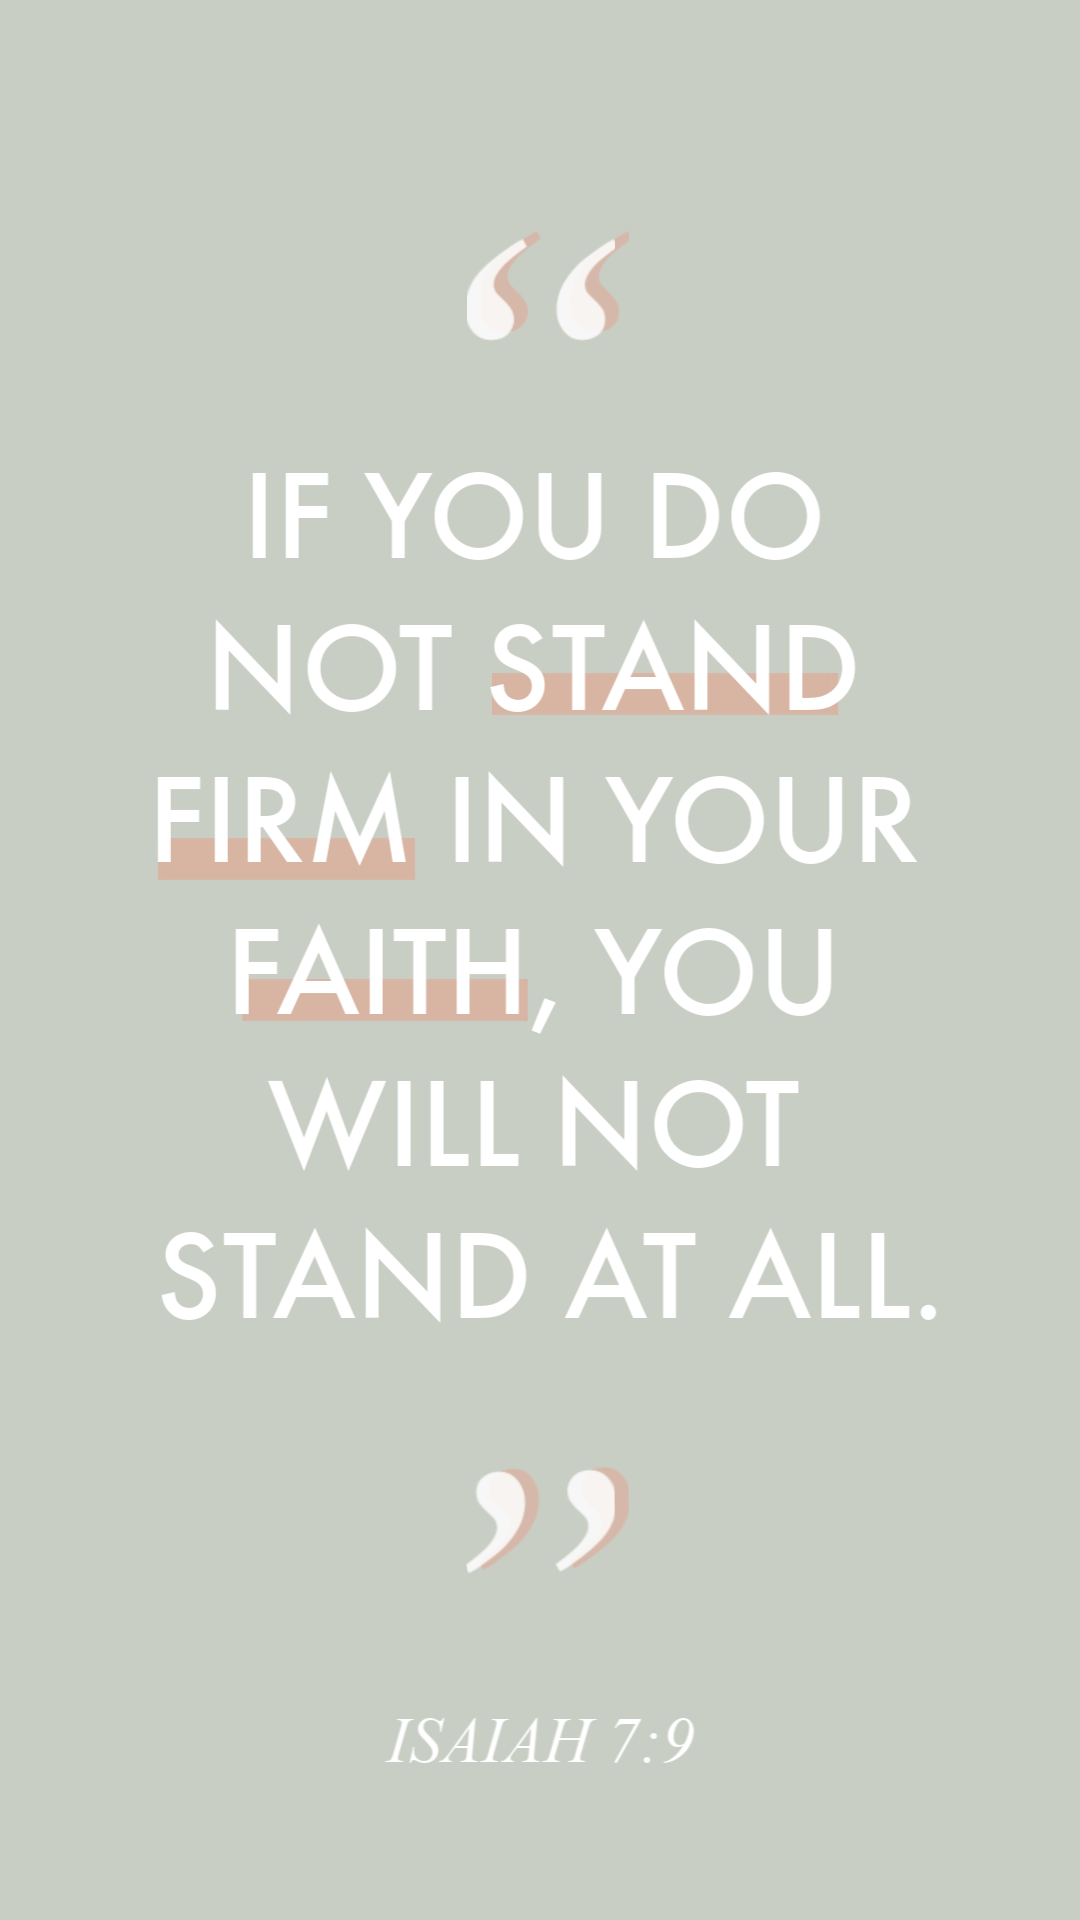 "If you do not stand firm in your faith, you will not stand at all." Isaiah 7:9. Day 2 of #12DaysofGrace 